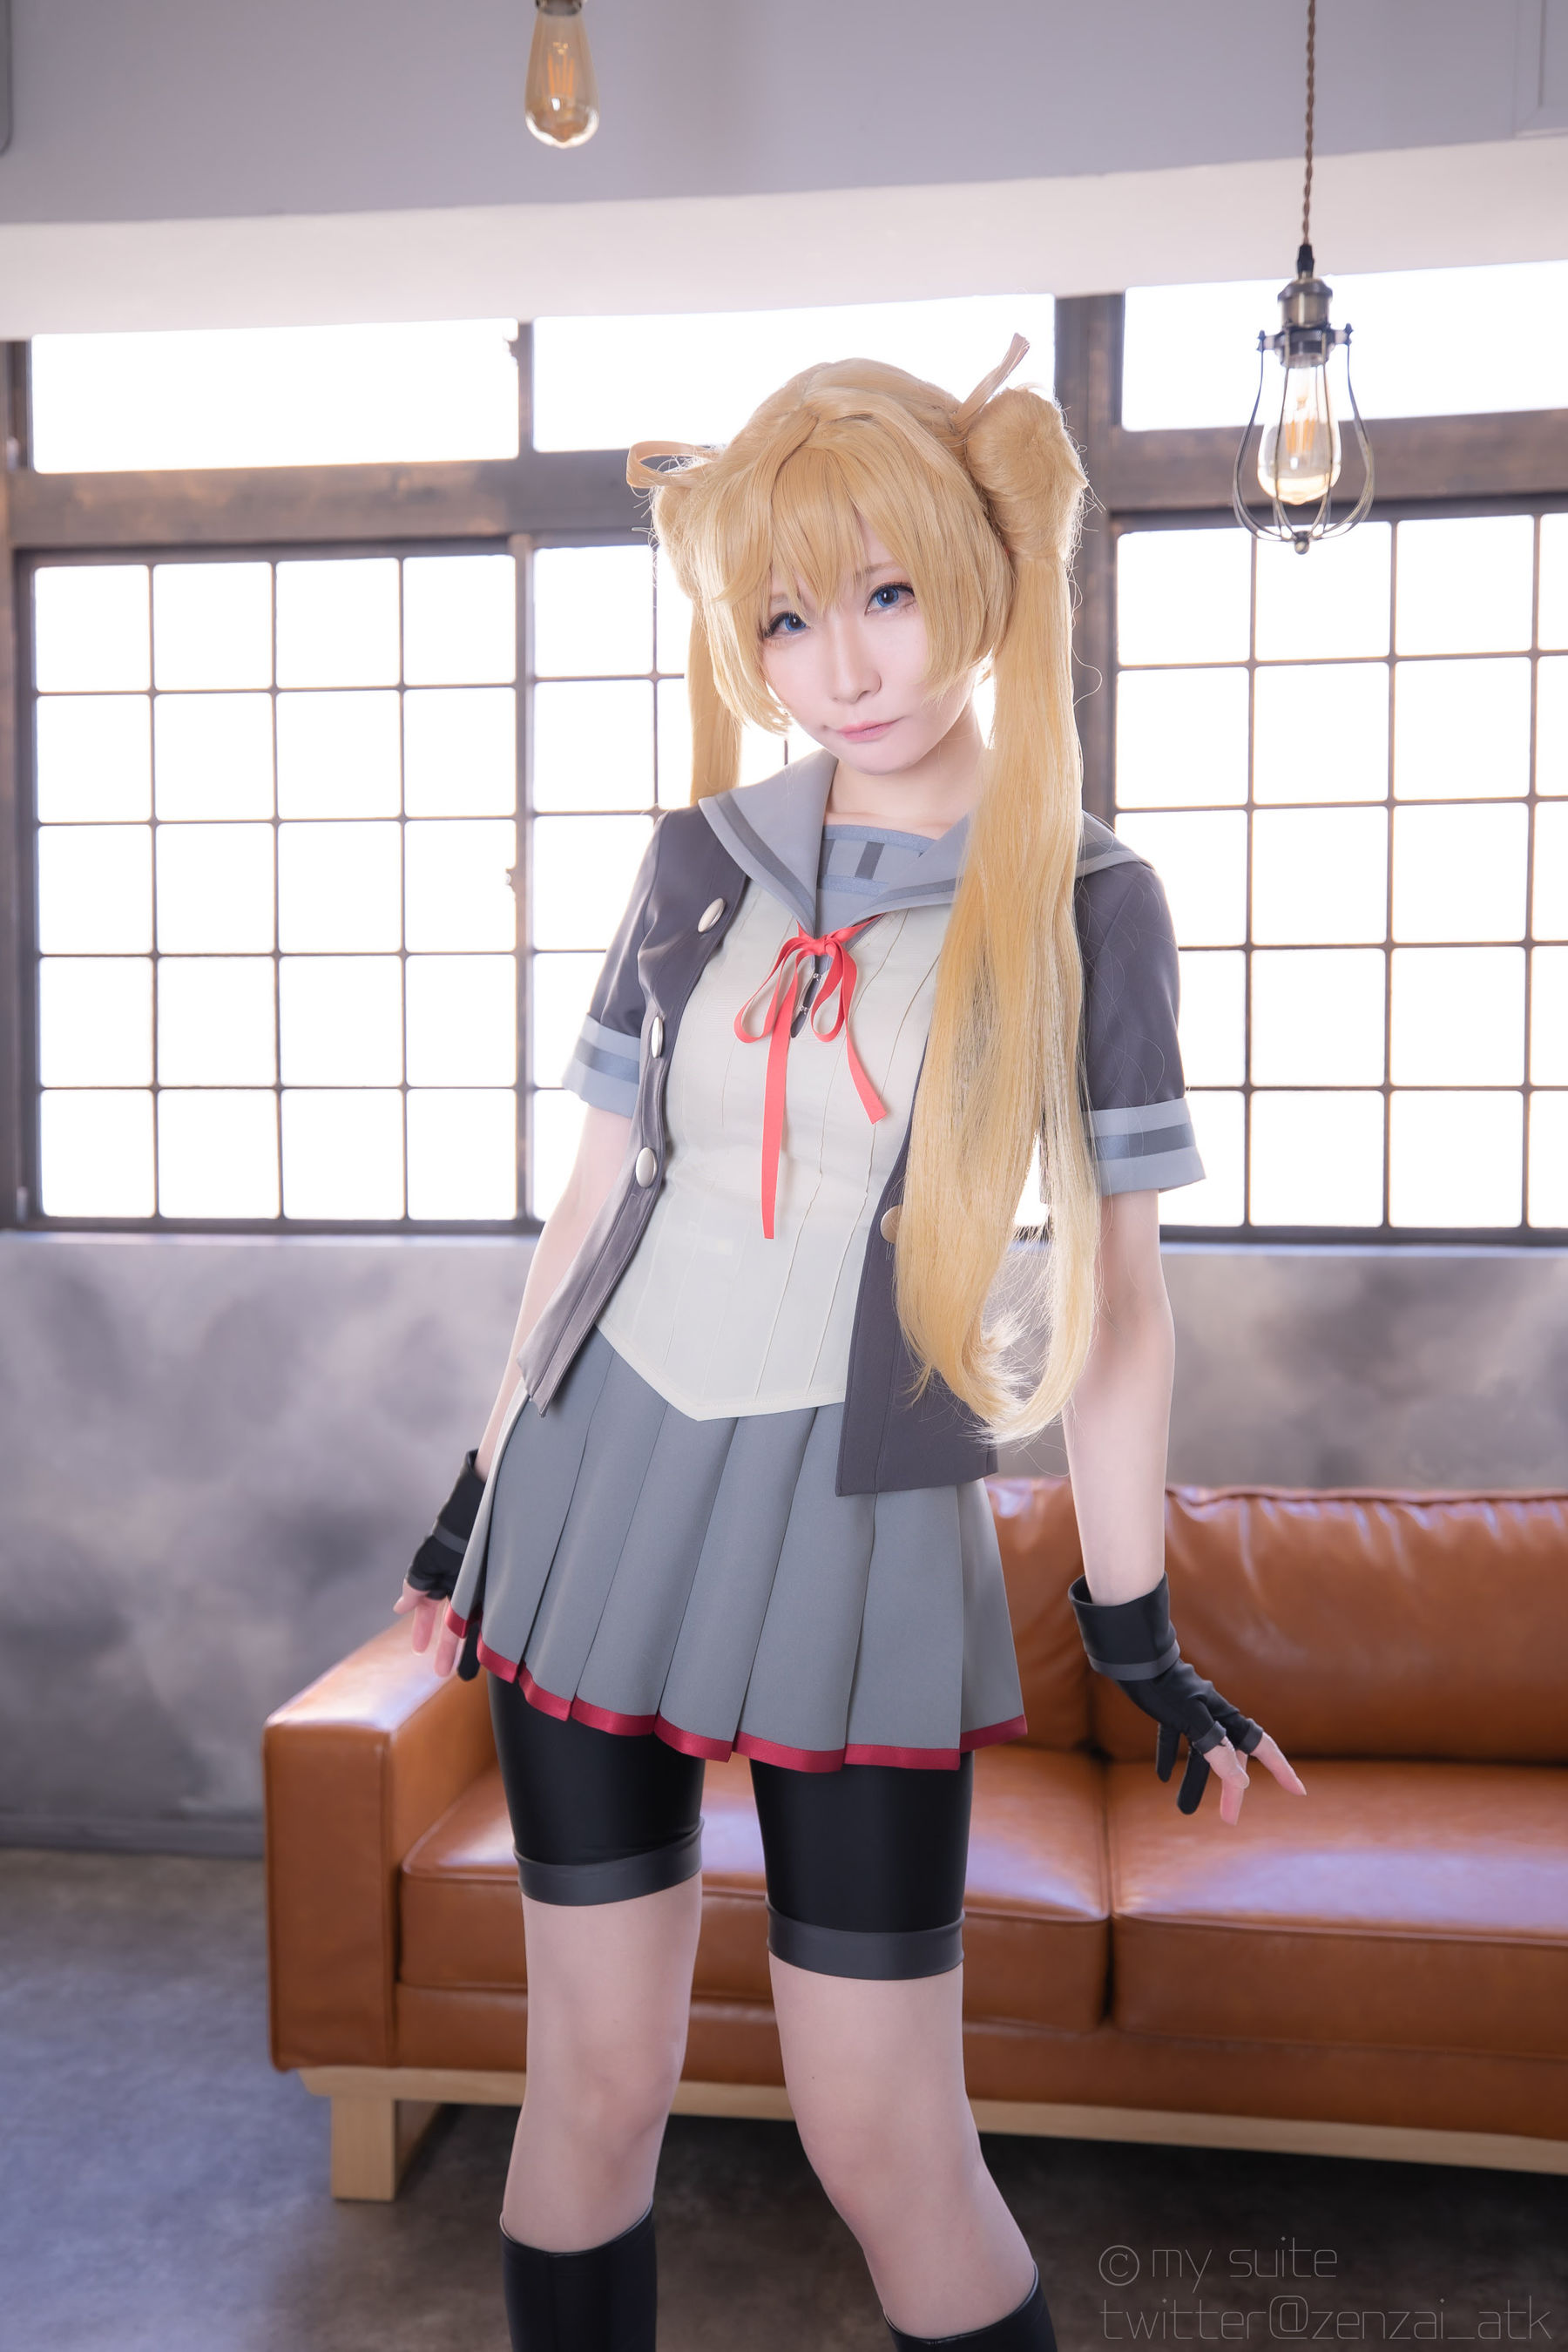 [Cosplay] [my suite] Atsuki あつき - 艦娘がスパッツの良さを教えてくれるROM Suite Collection.38 (KanColle) - 11